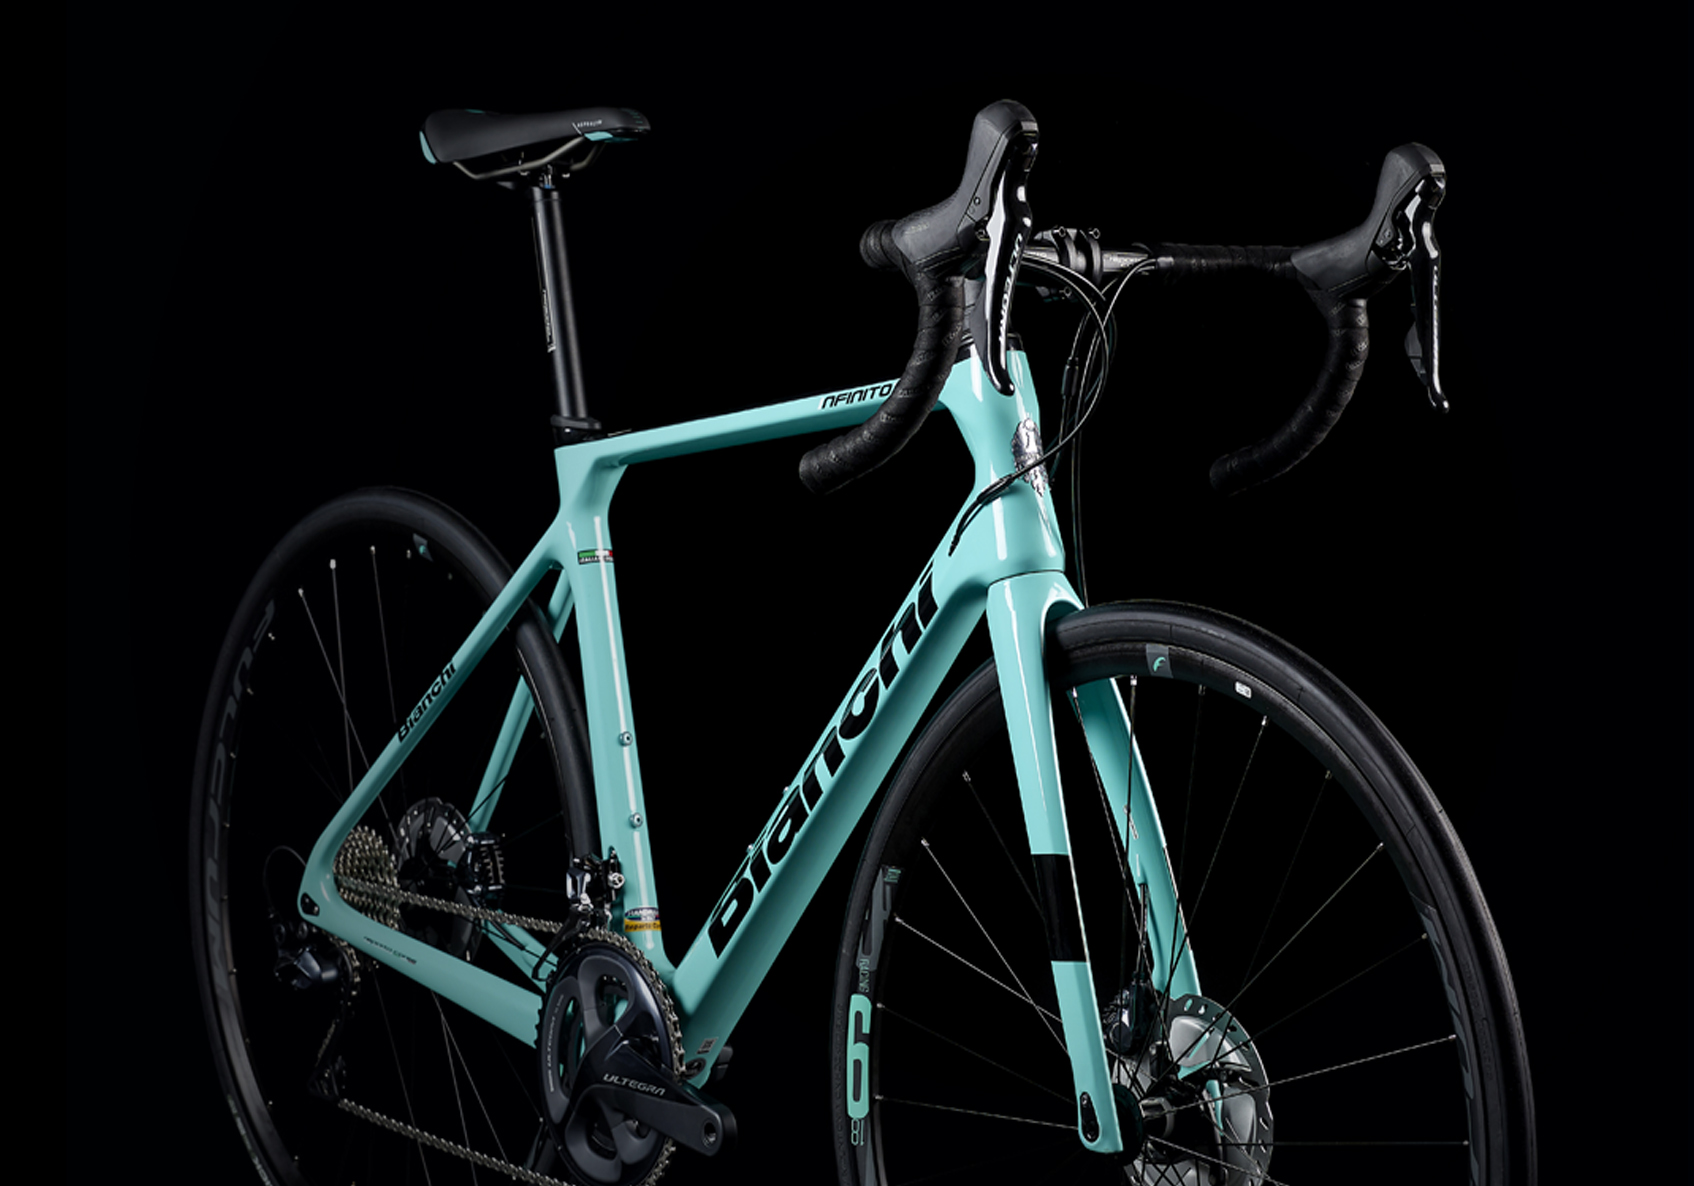 The New Infinito XE Bianchi.